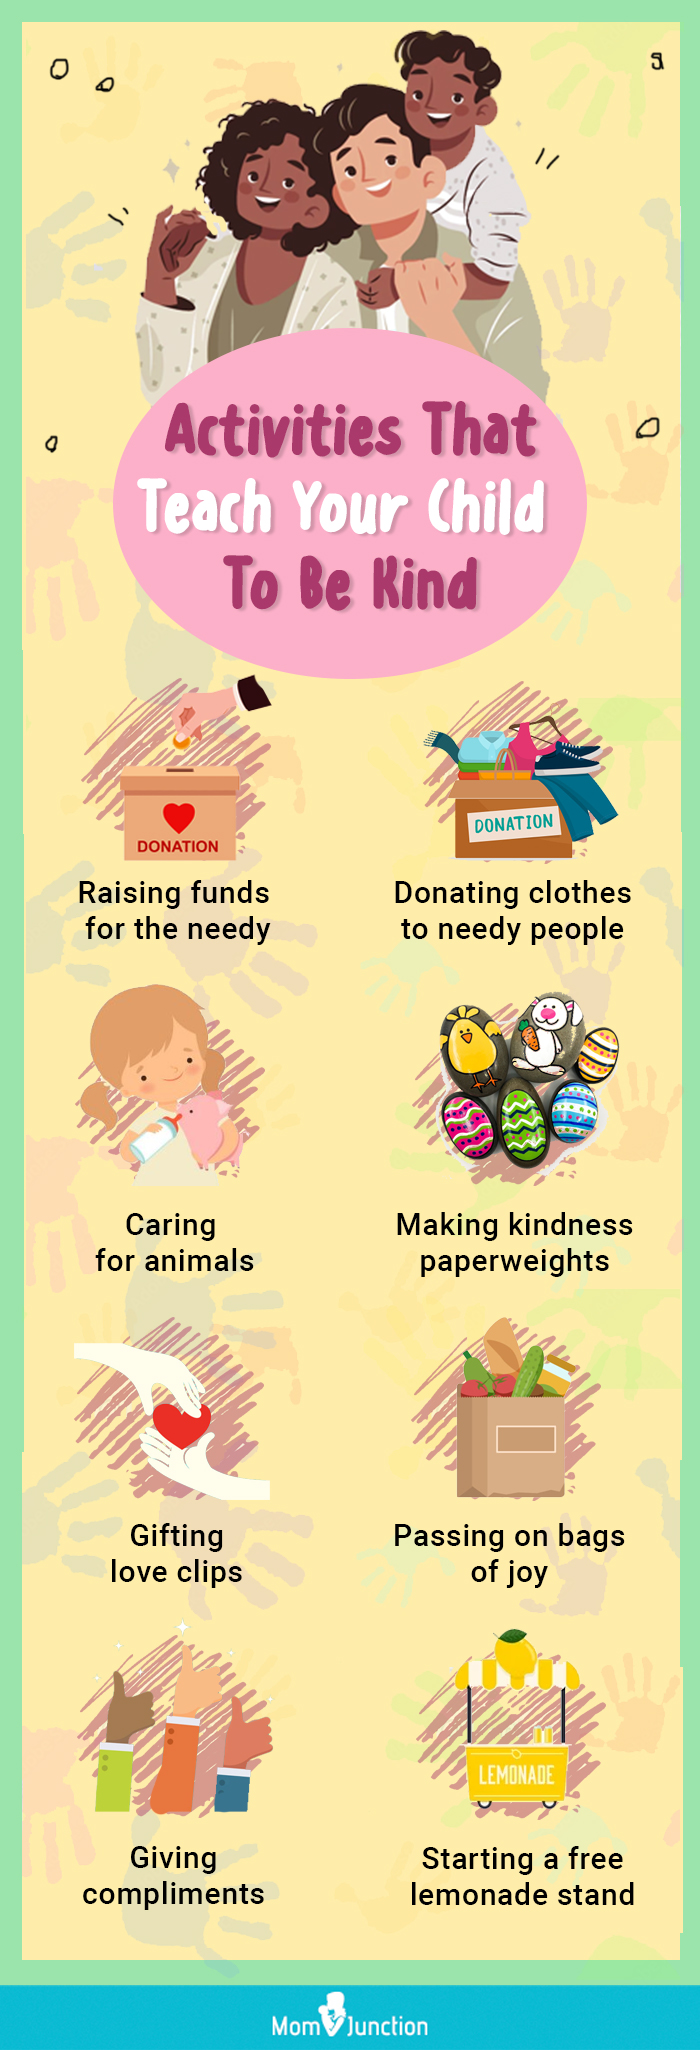 activities that teach your child to be kind (infographic)